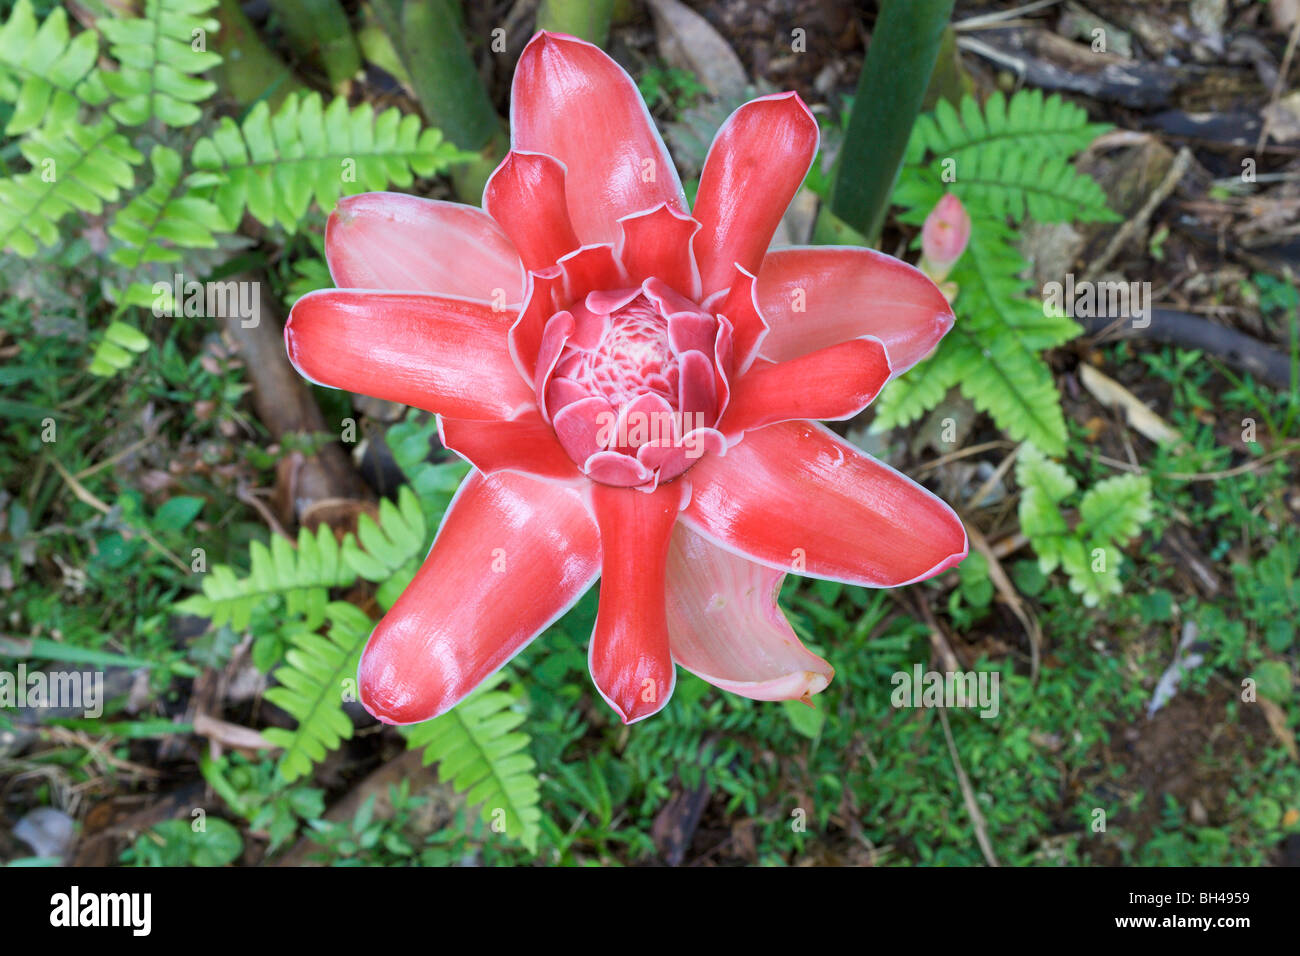 Torch ginger (Etlingera elatior) or red ginger lily with bright red petals. Stock Photo